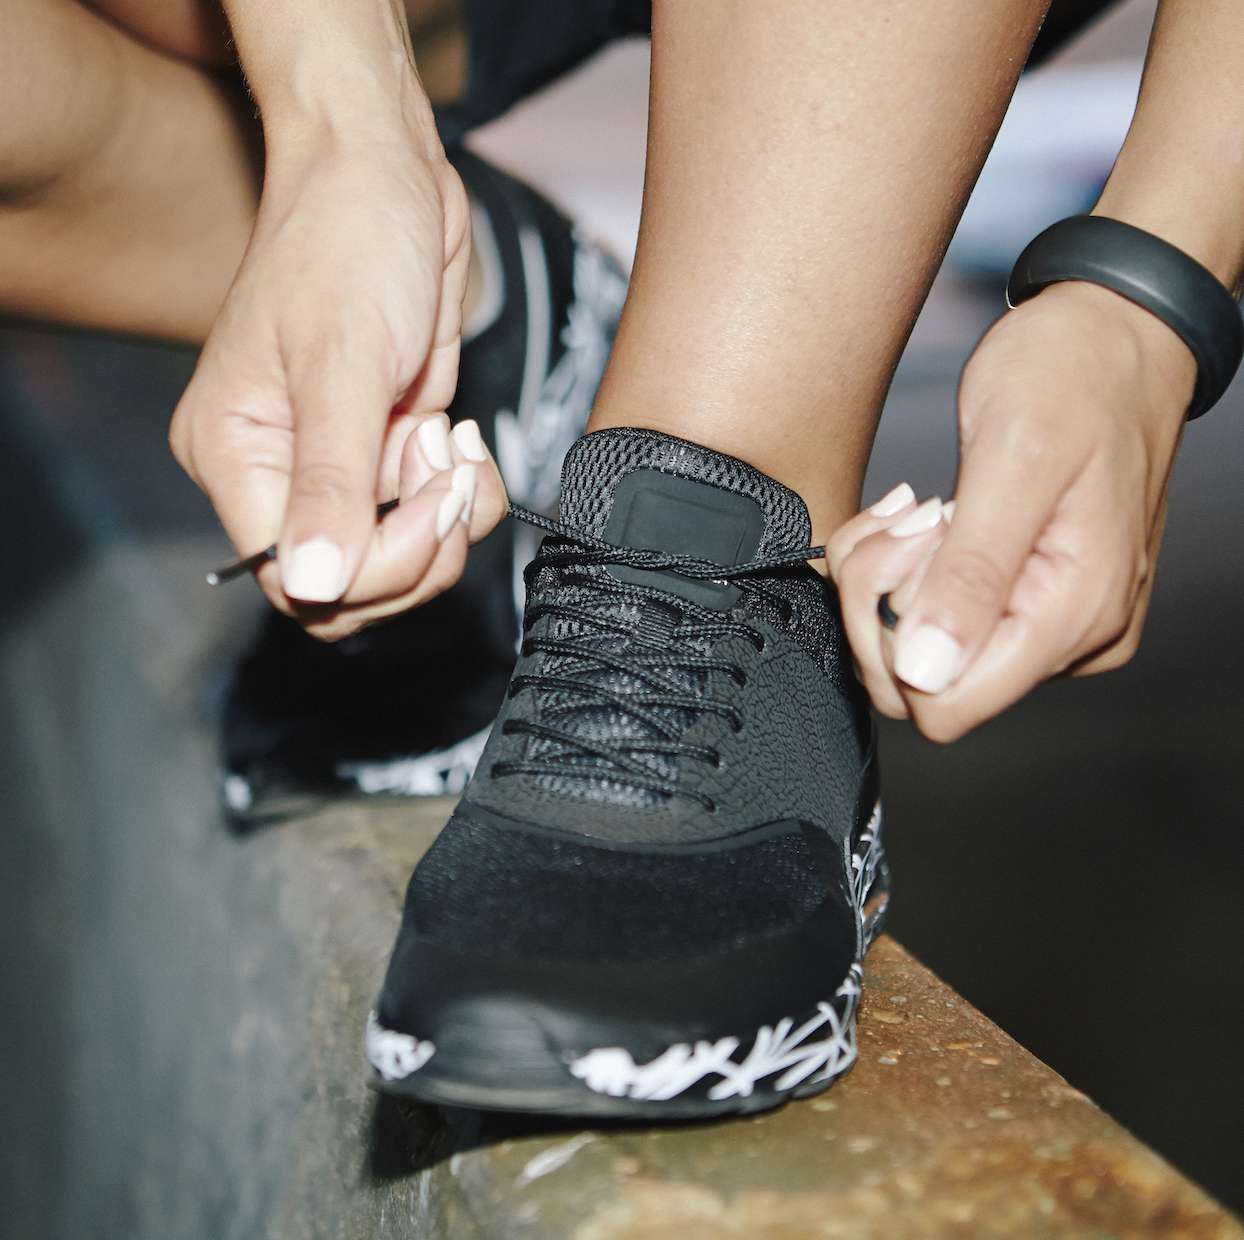 The Best Running Shoes for Women 